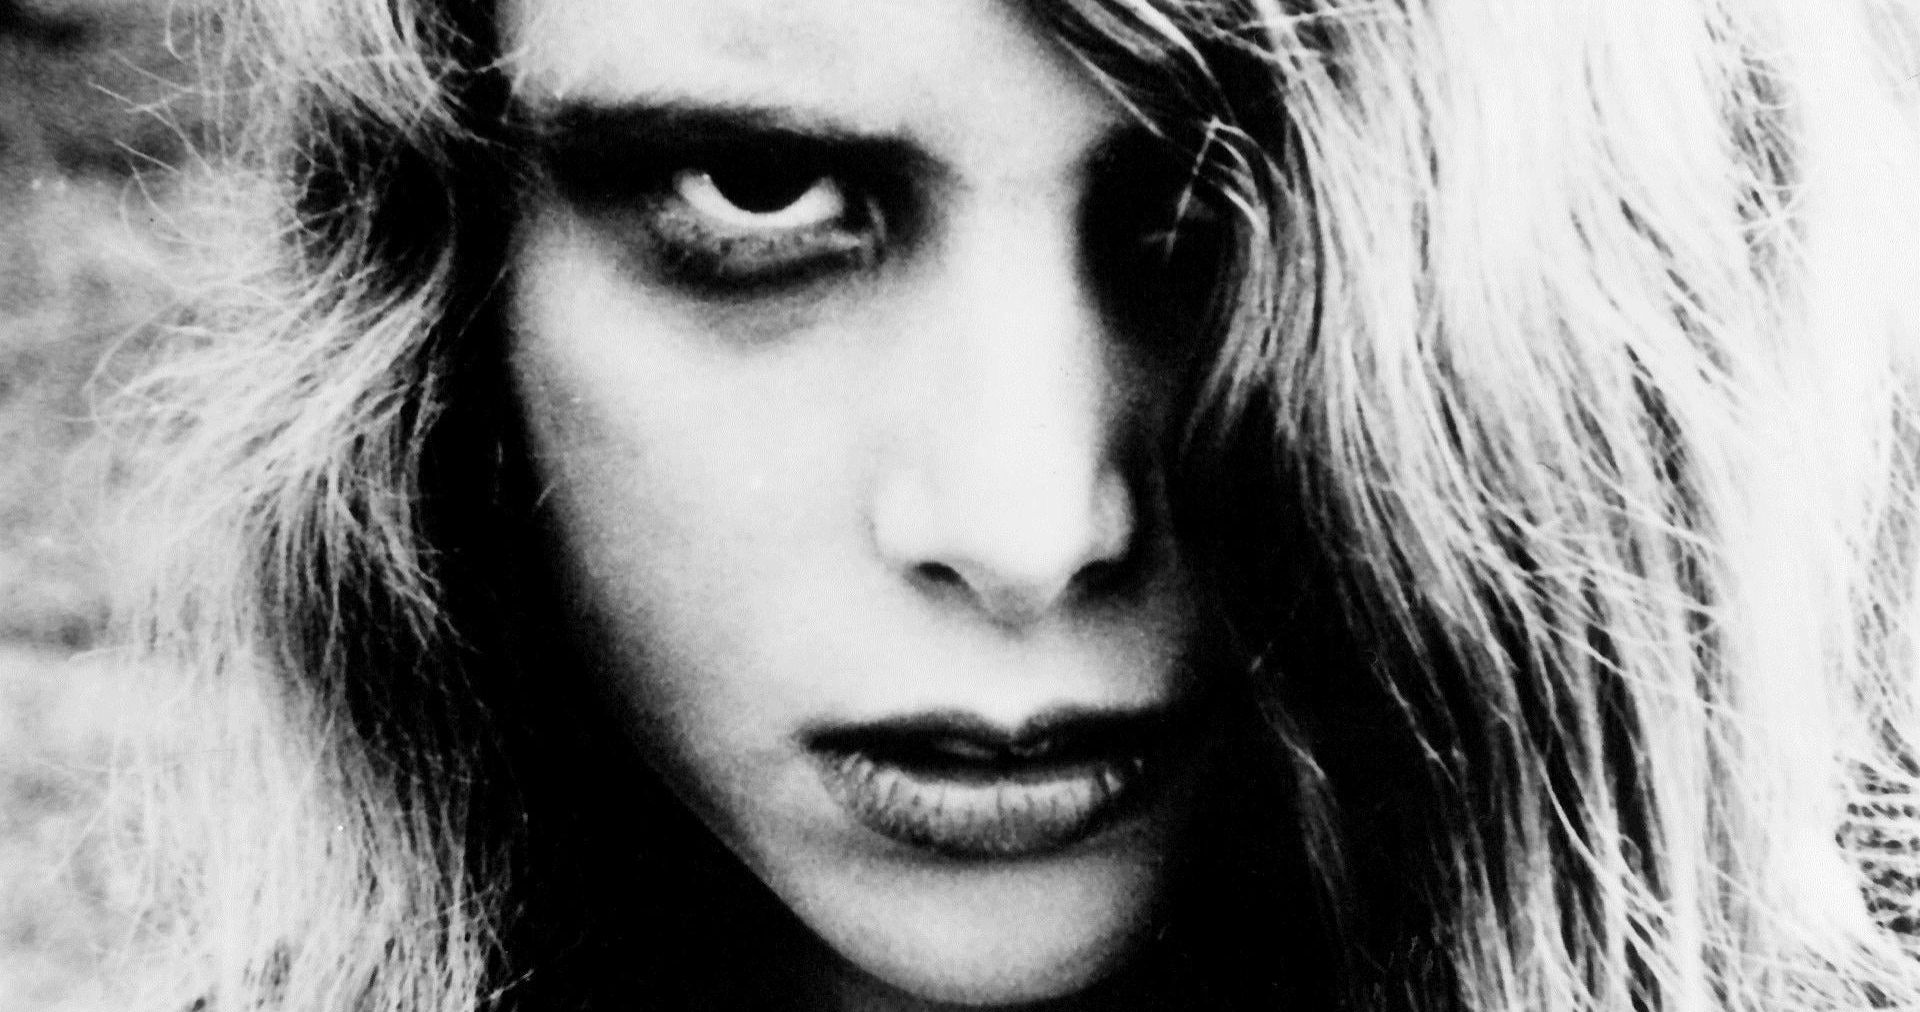 Date Night of the Living Dead Streaming on Shout! Factory TV for Valentine's Day